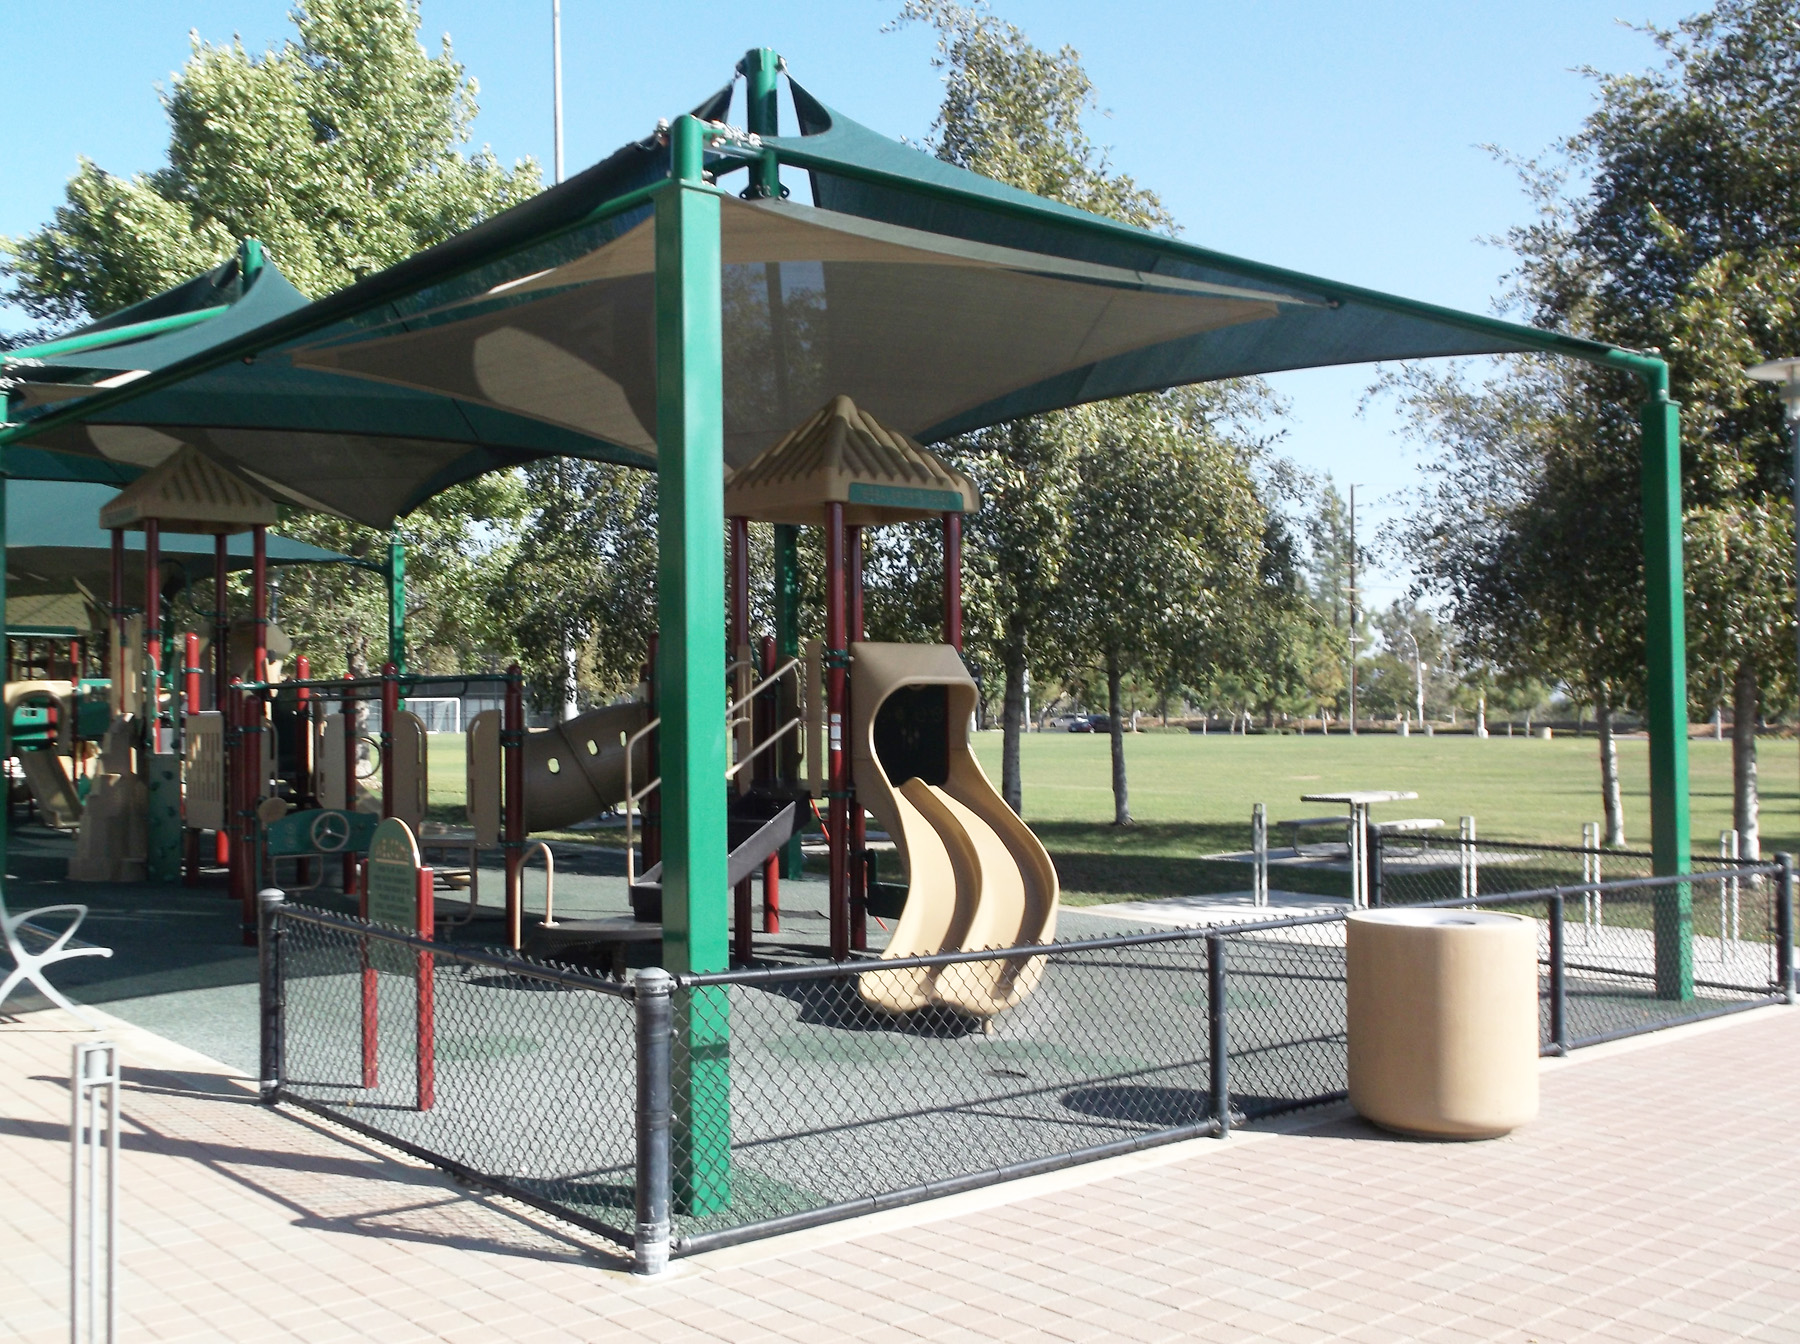 Shade Structures protect children for the sun at playgrounds